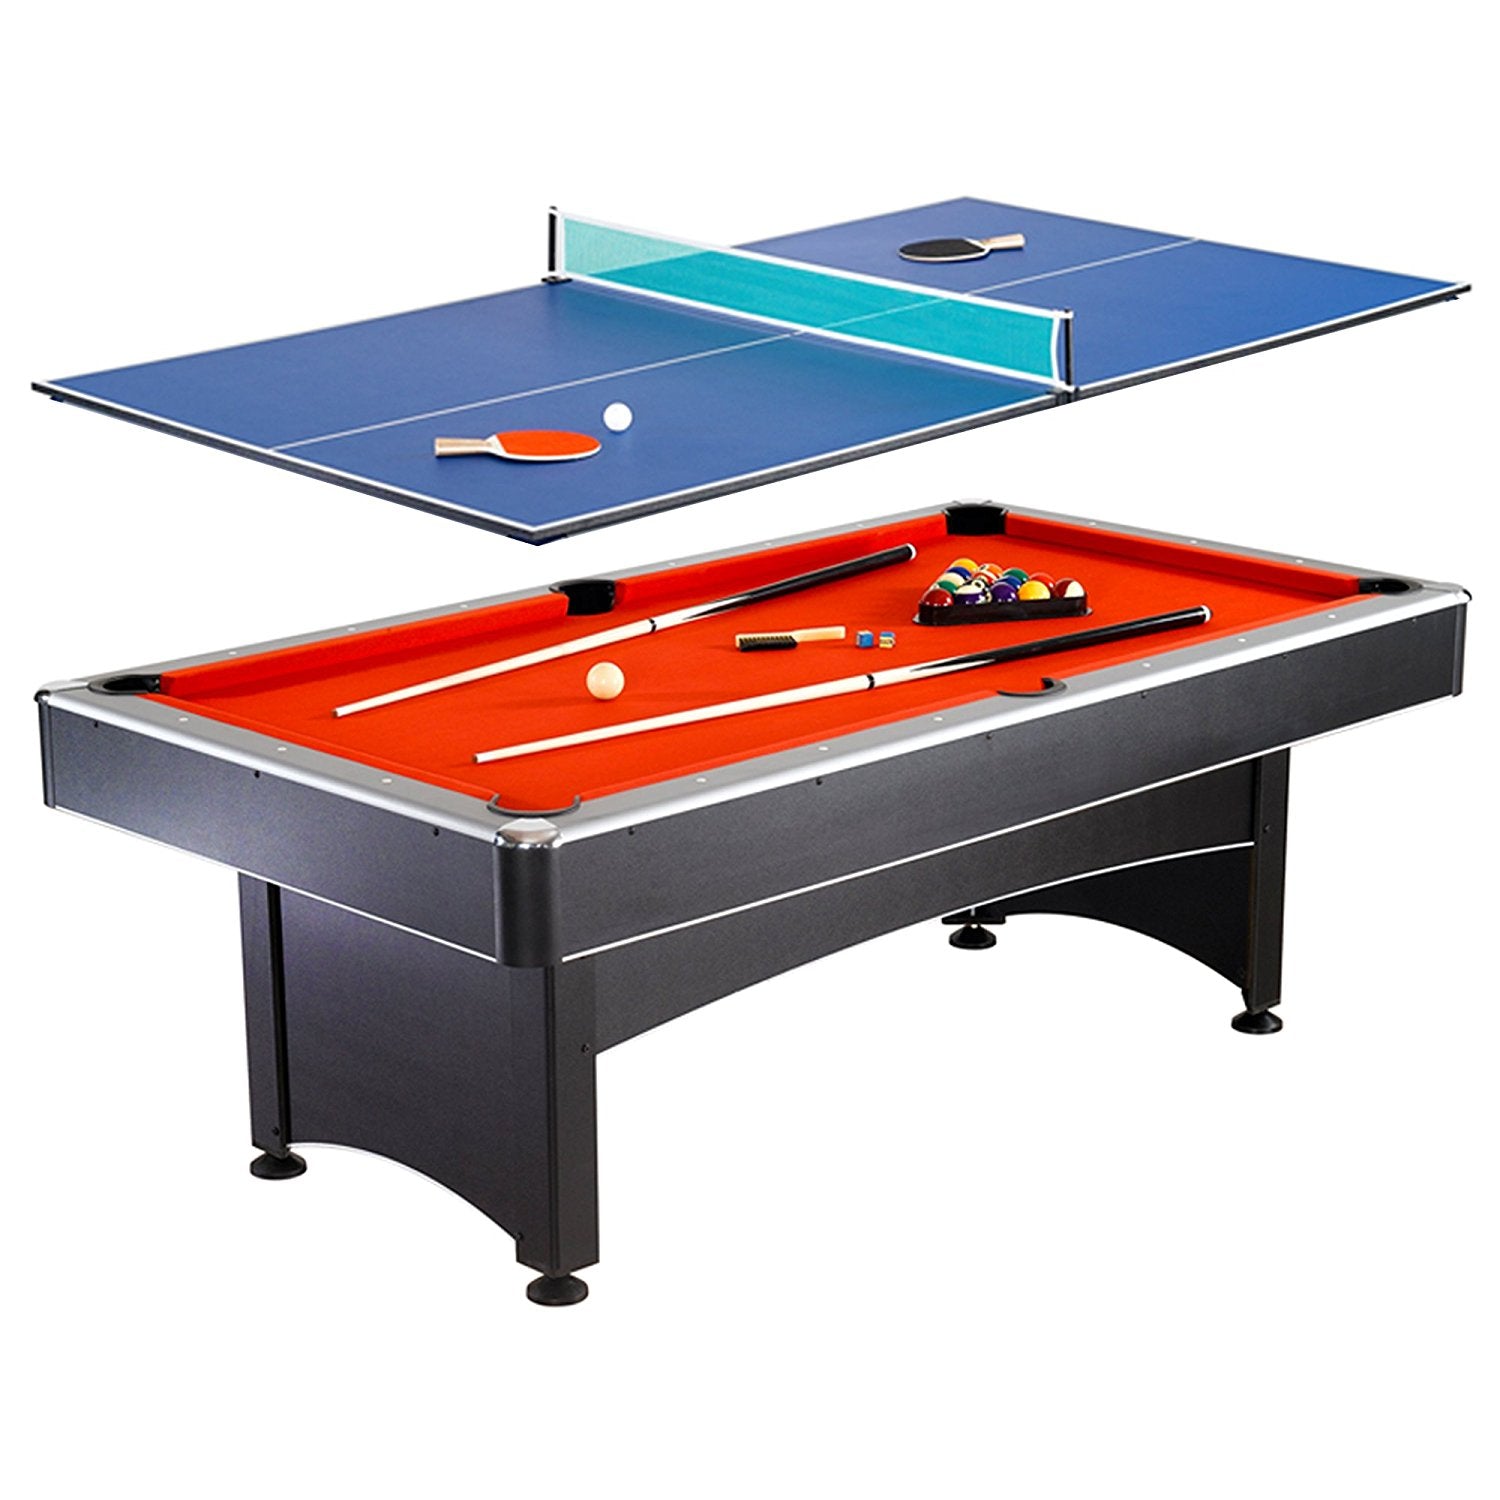 7-foot Pool and Table Tennis Multi Game with Red Felt and Blue Table Tennis Surface. Includes Cues, Paddles and Balls